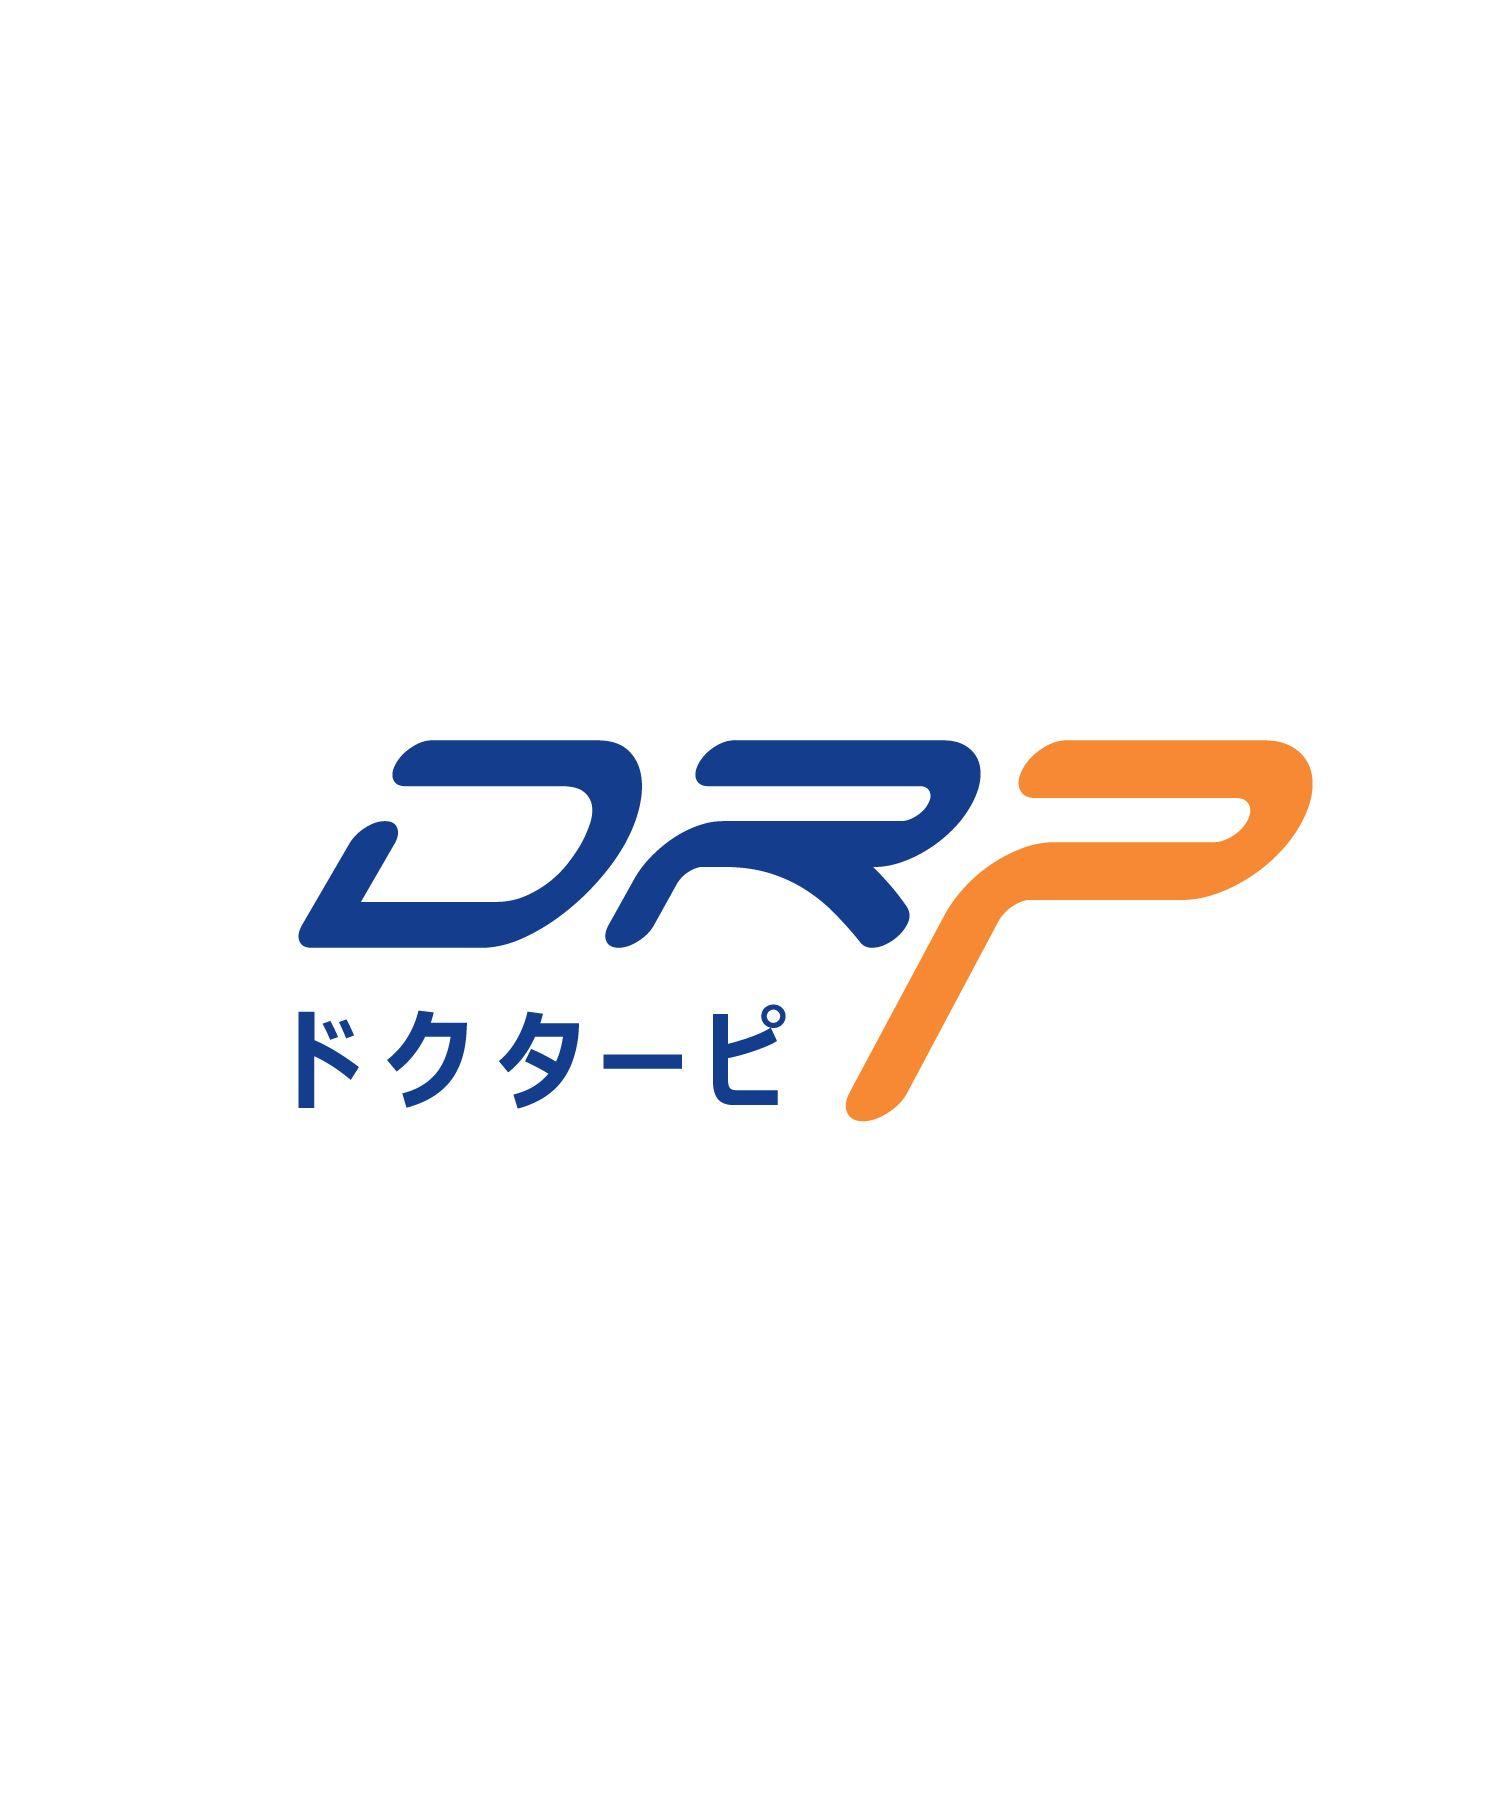 DRP Logo - DRP ドクターピ Logo : An anti aging product from Japan . Designed by ...